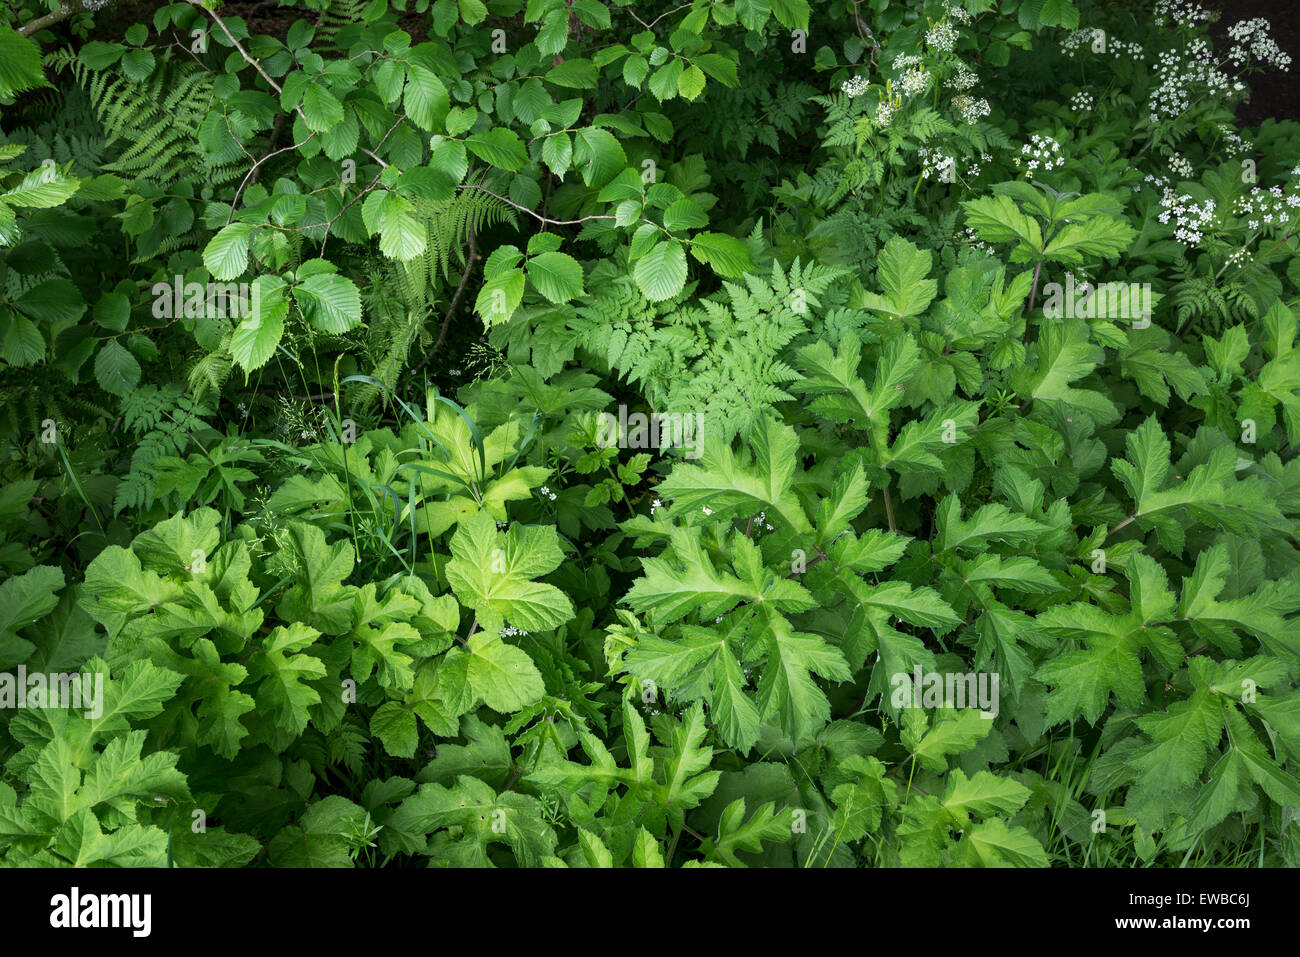 Early summer greenery including foliage of Hogweed, cow parsley and ferns. Stock Photo